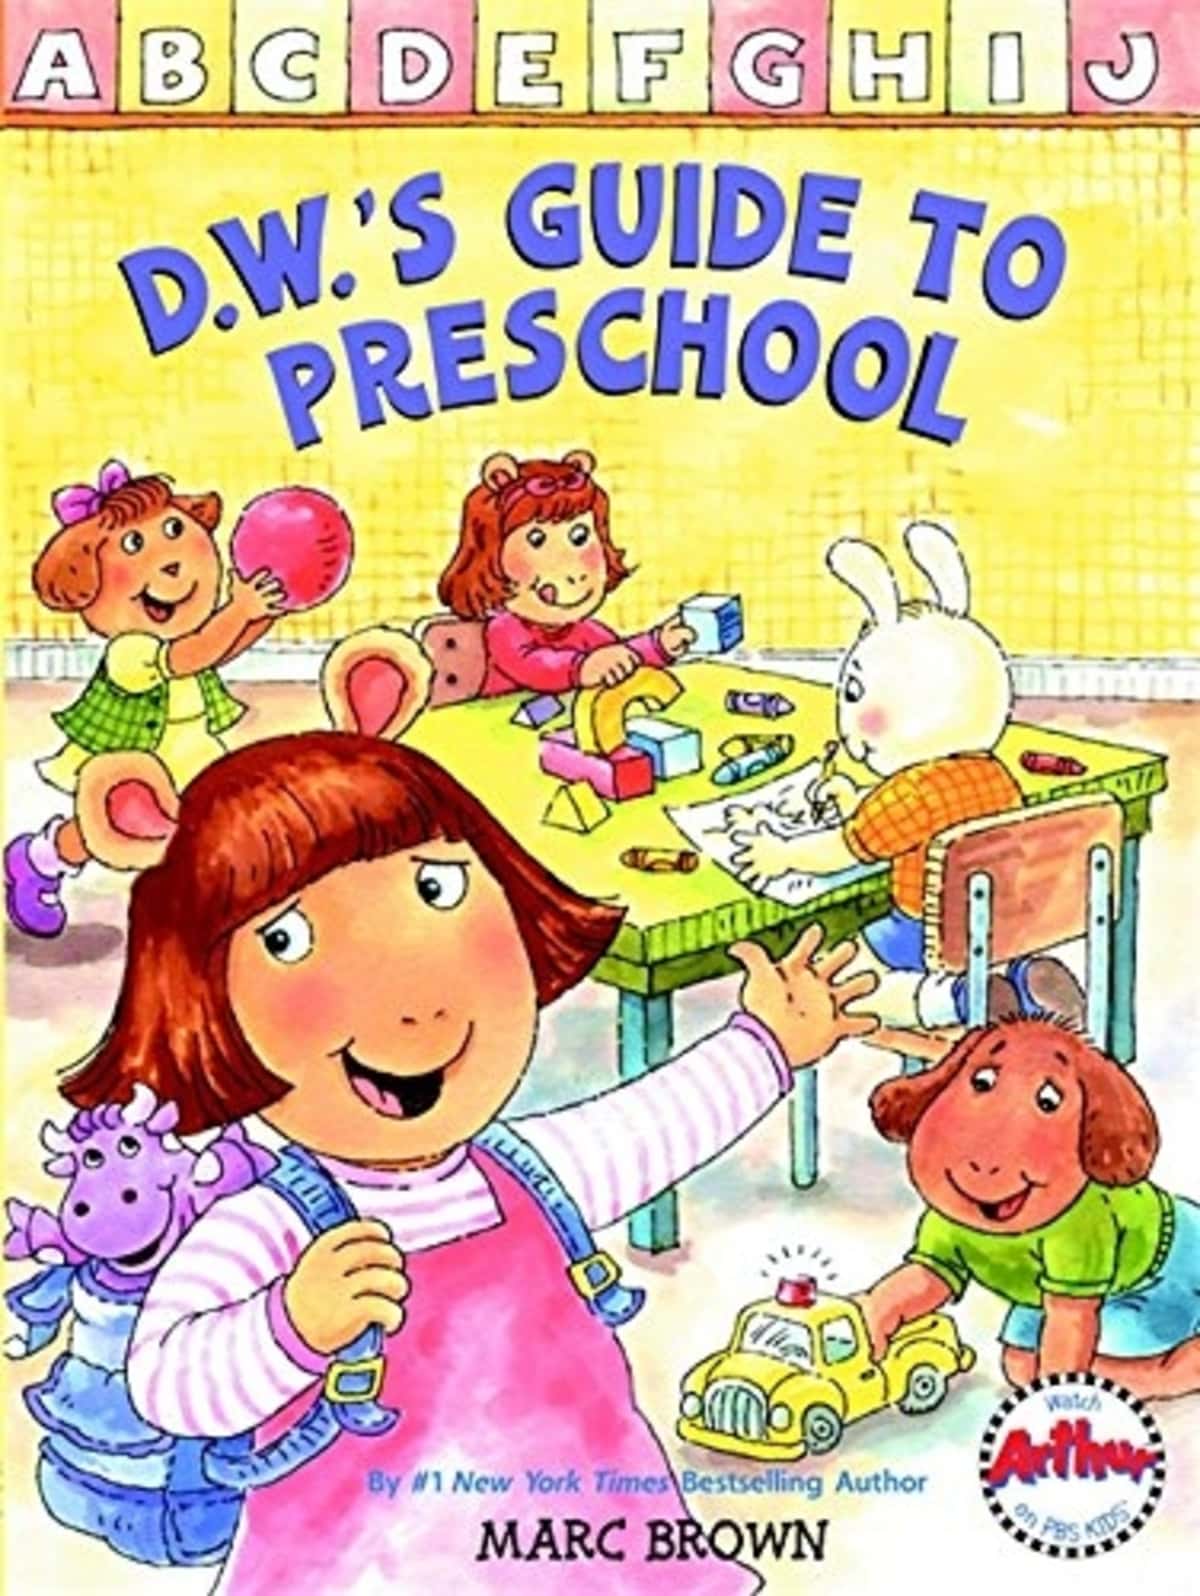 The book cover of "D.W.'s Guide to Preschool."